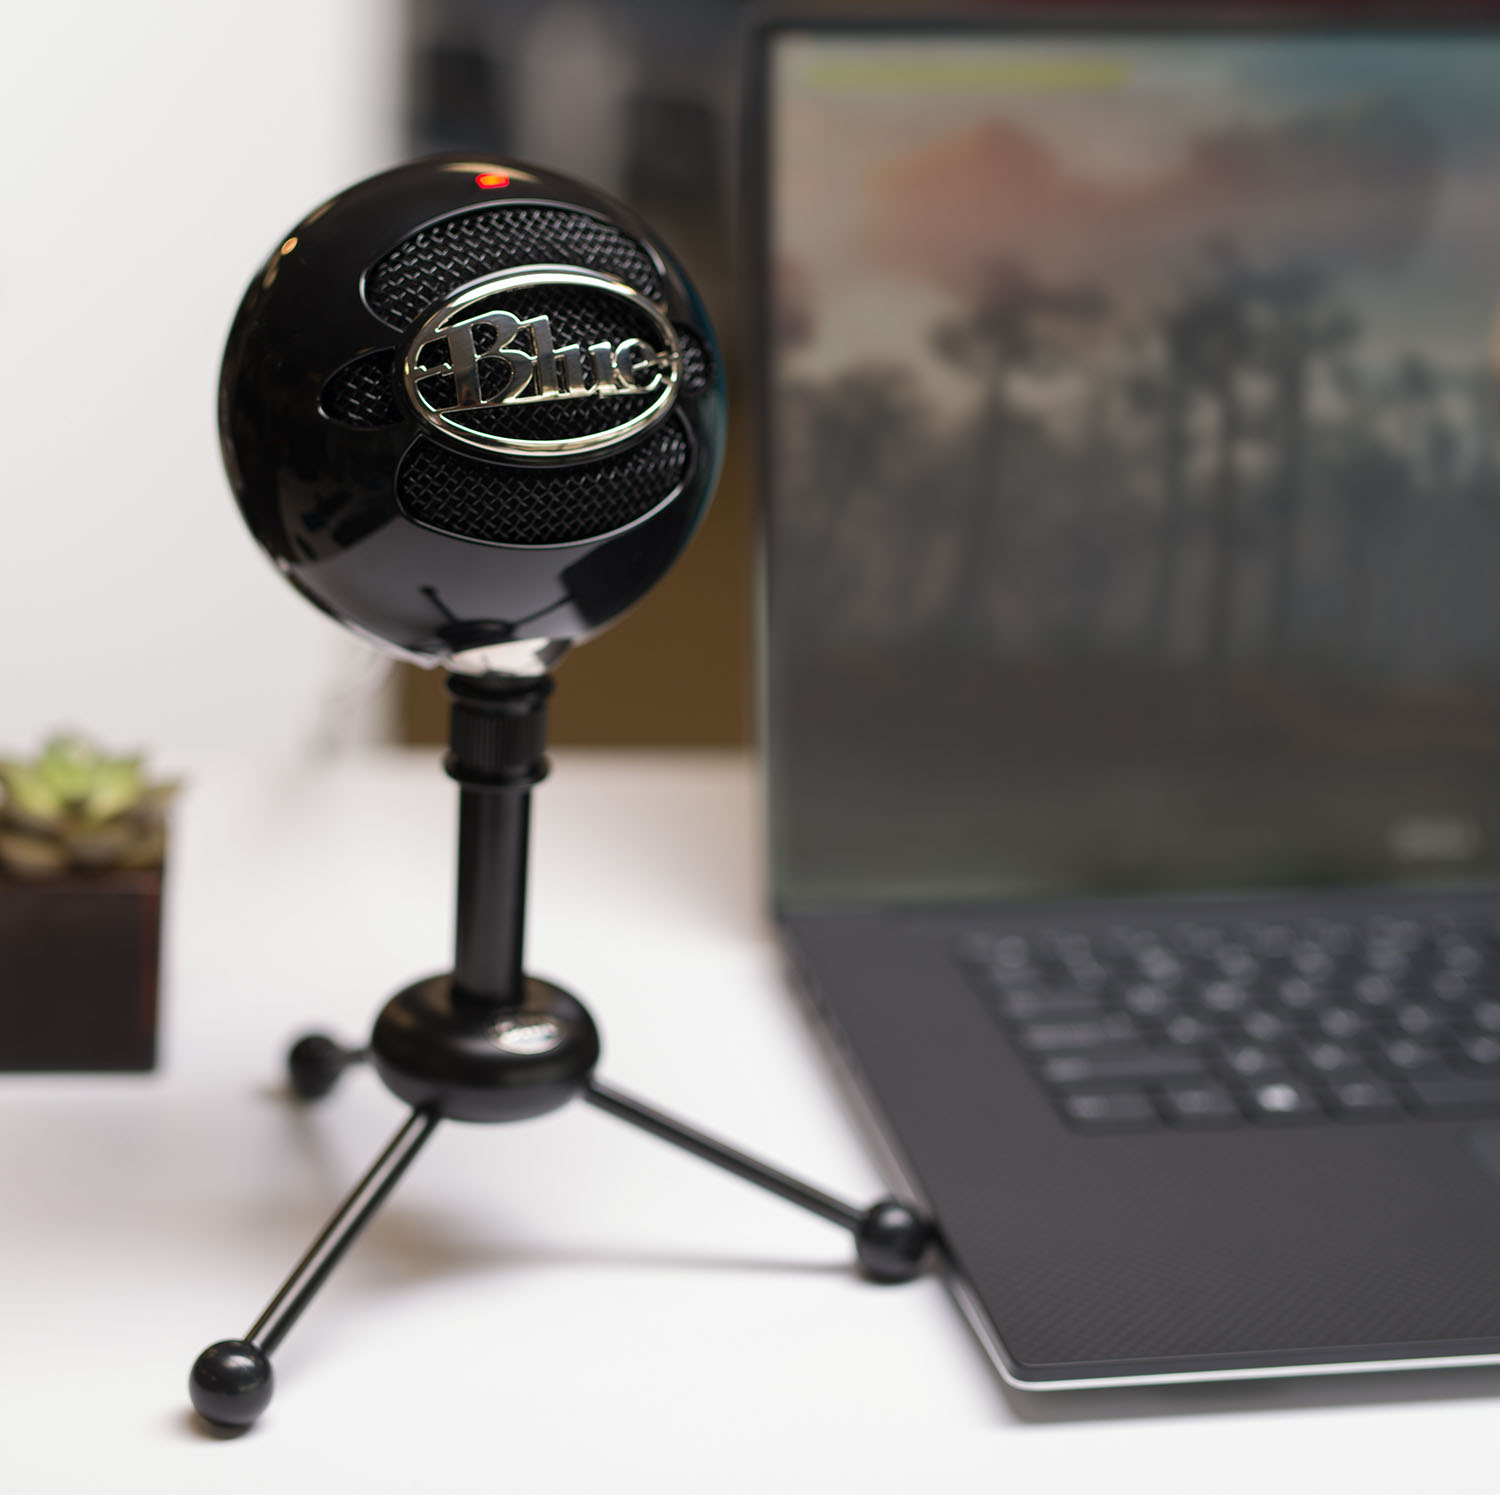 NeweggBusiness - Blue Snowball iCE USB Microphone for PC, Mac, Gaming,  Recording, Streaming, Podcasting, with Cardioid Condenser Mic Capsule,  Adjustable Desktop Stand and USB cable, Plug 'n Play – Black